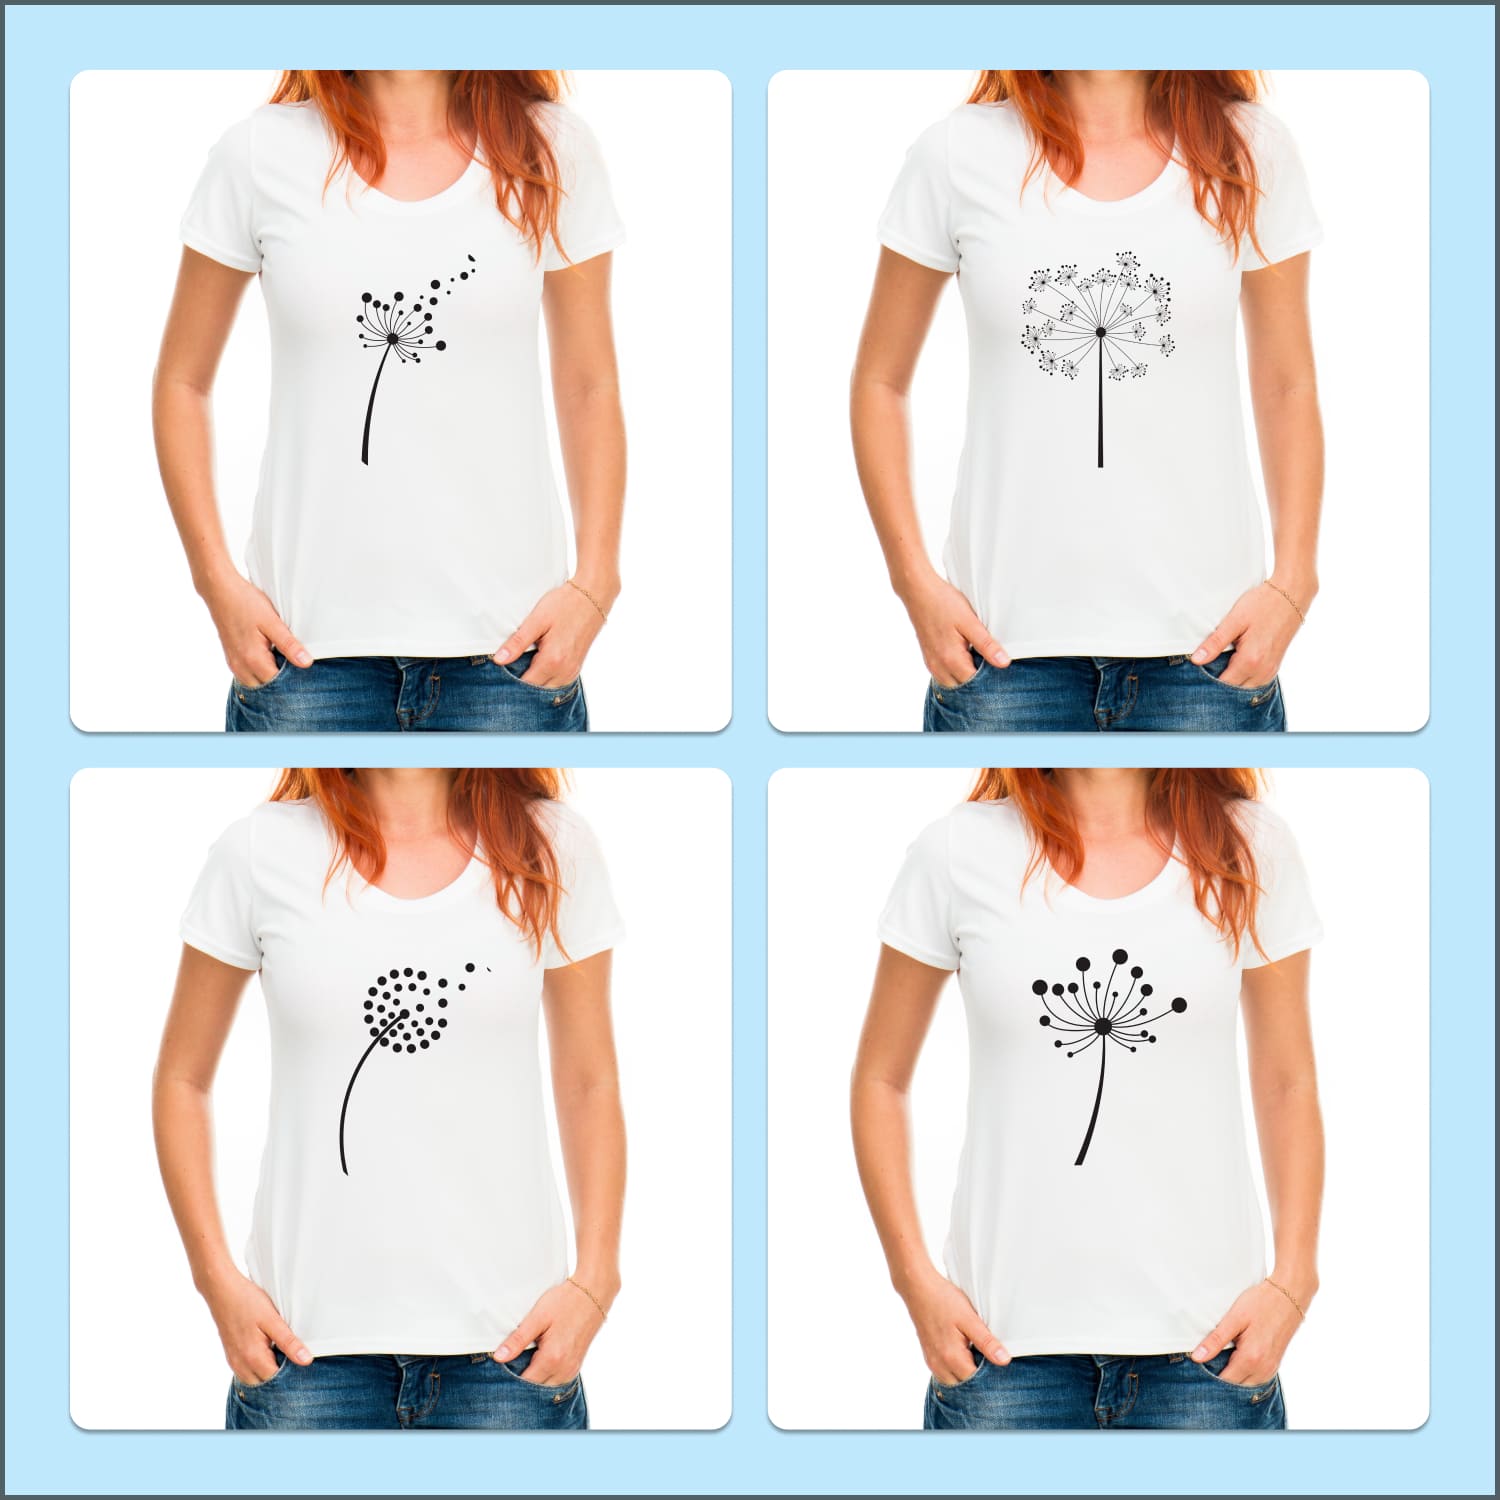 Set of t-shirt images with colorful dandelion prints.